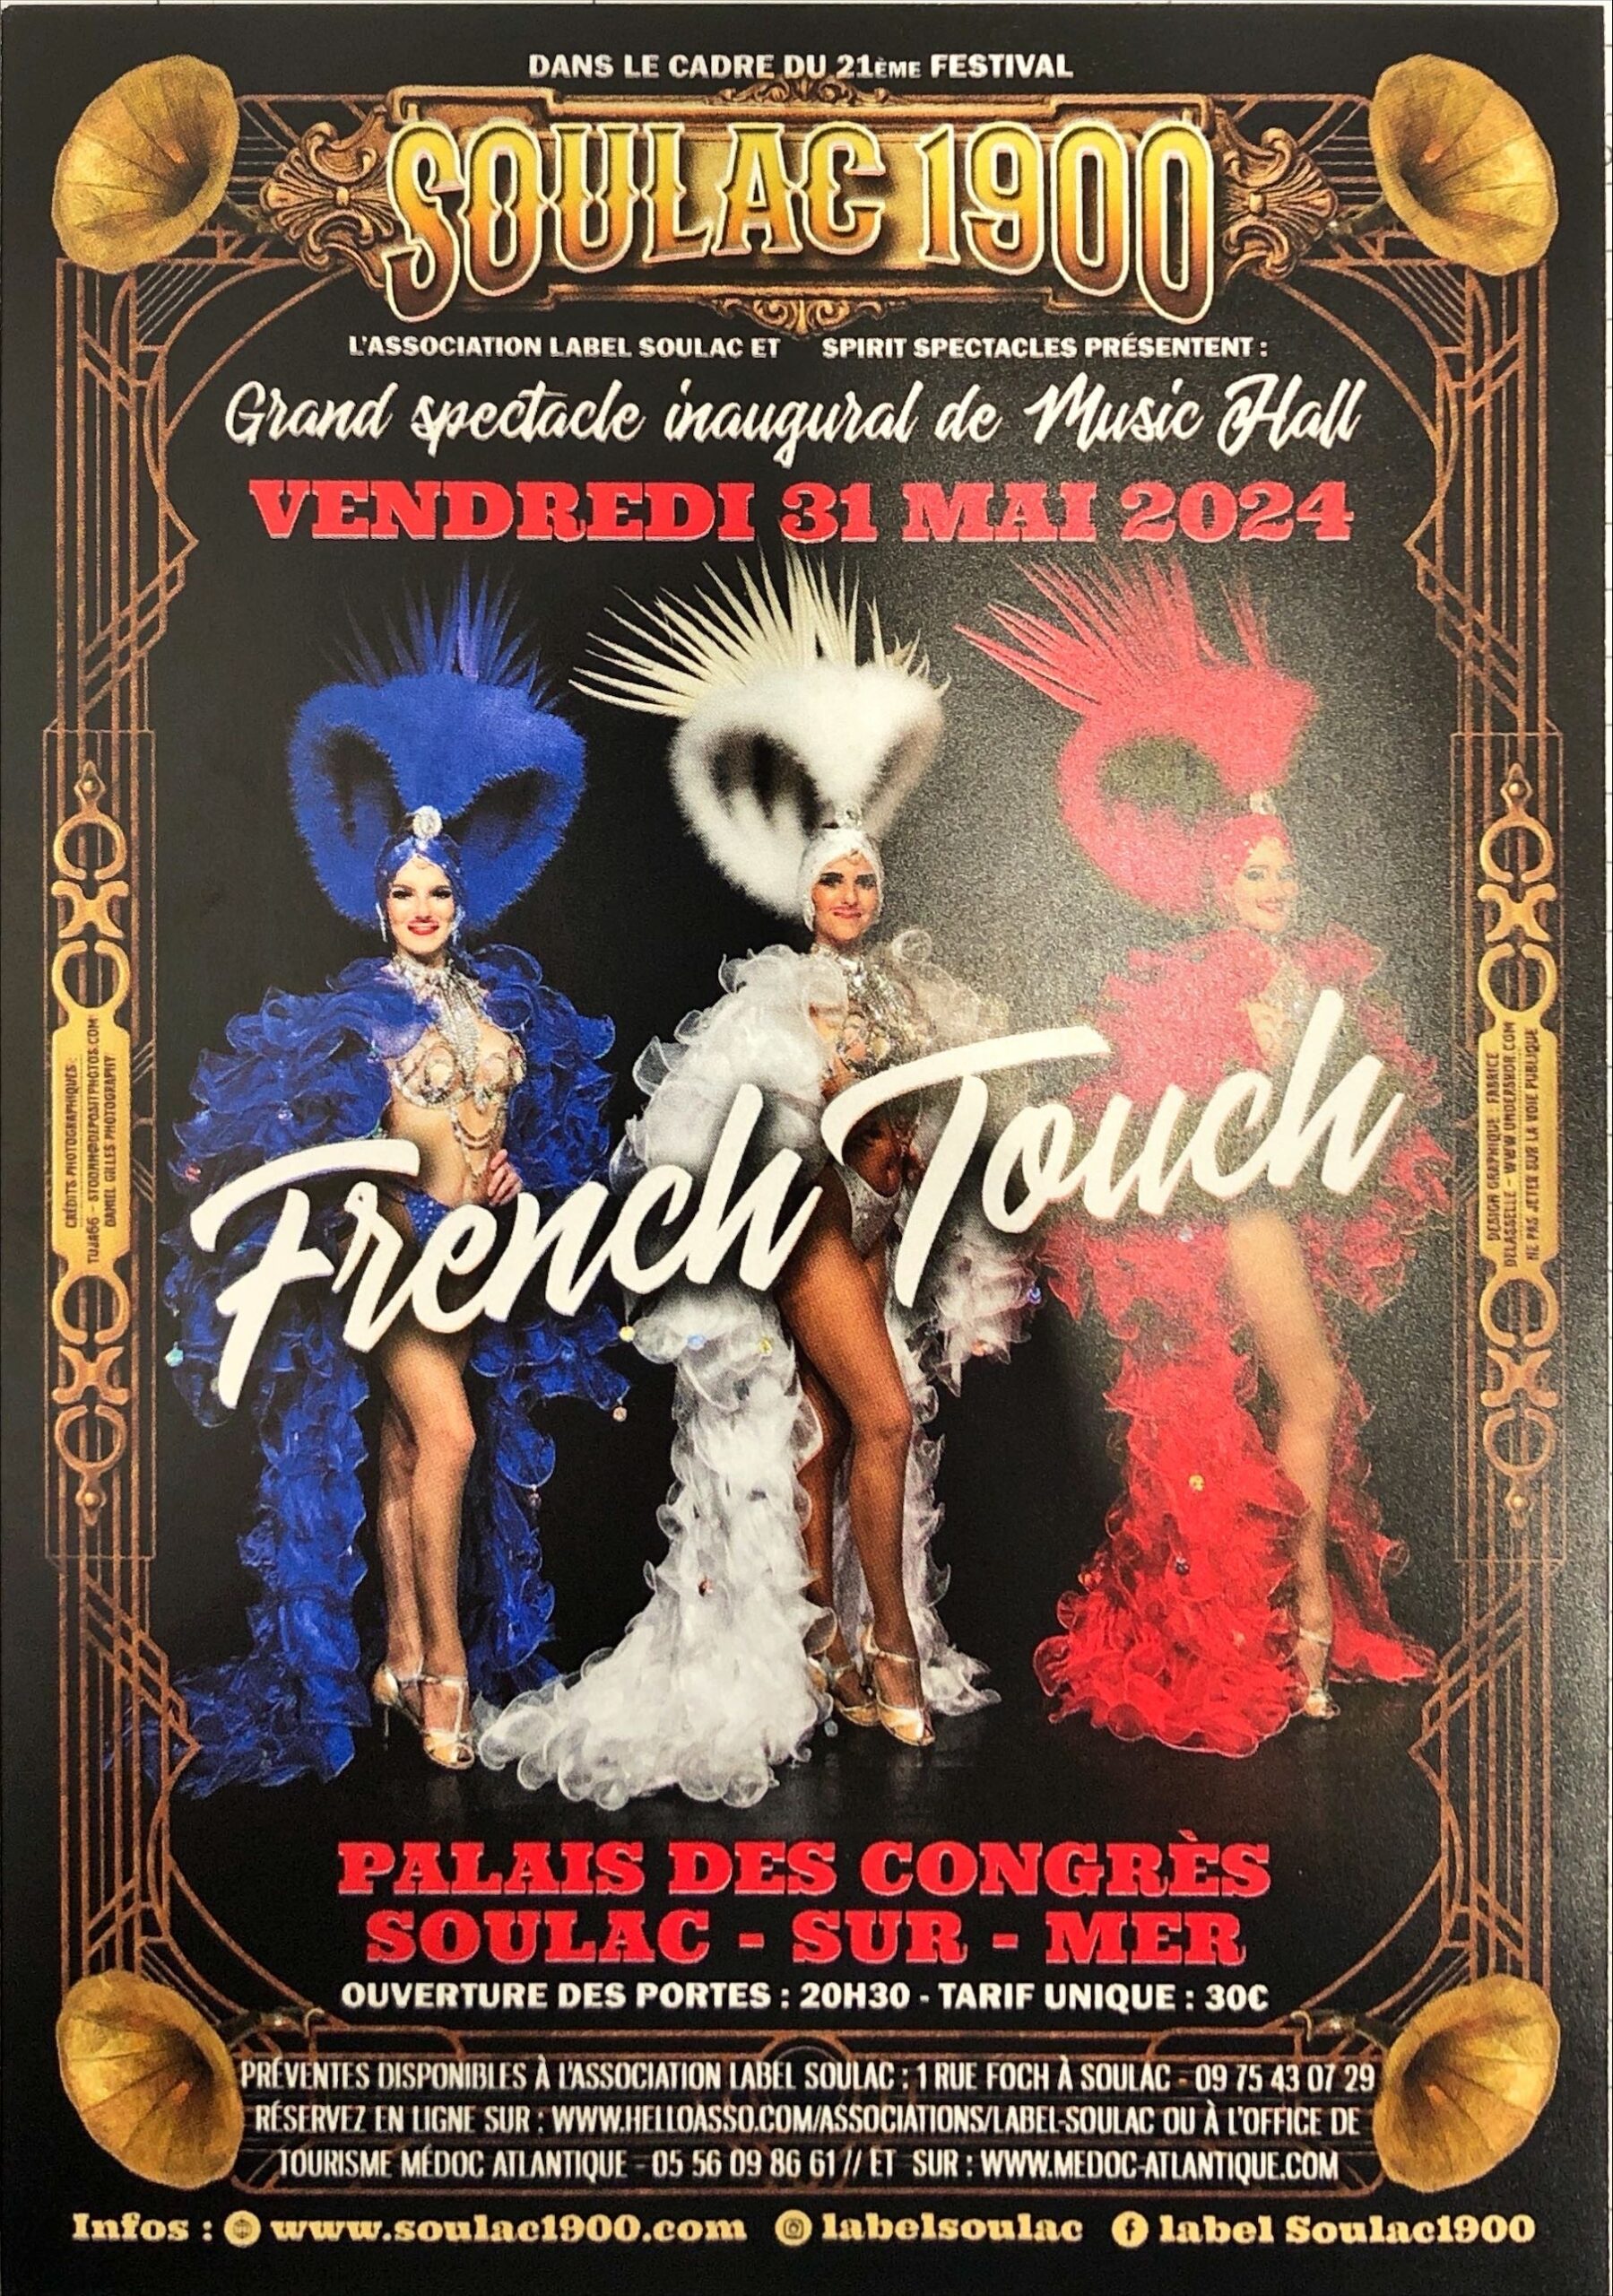 Soulac 1900 - Grand spectacle inaugural de Music Hall "French Touch"